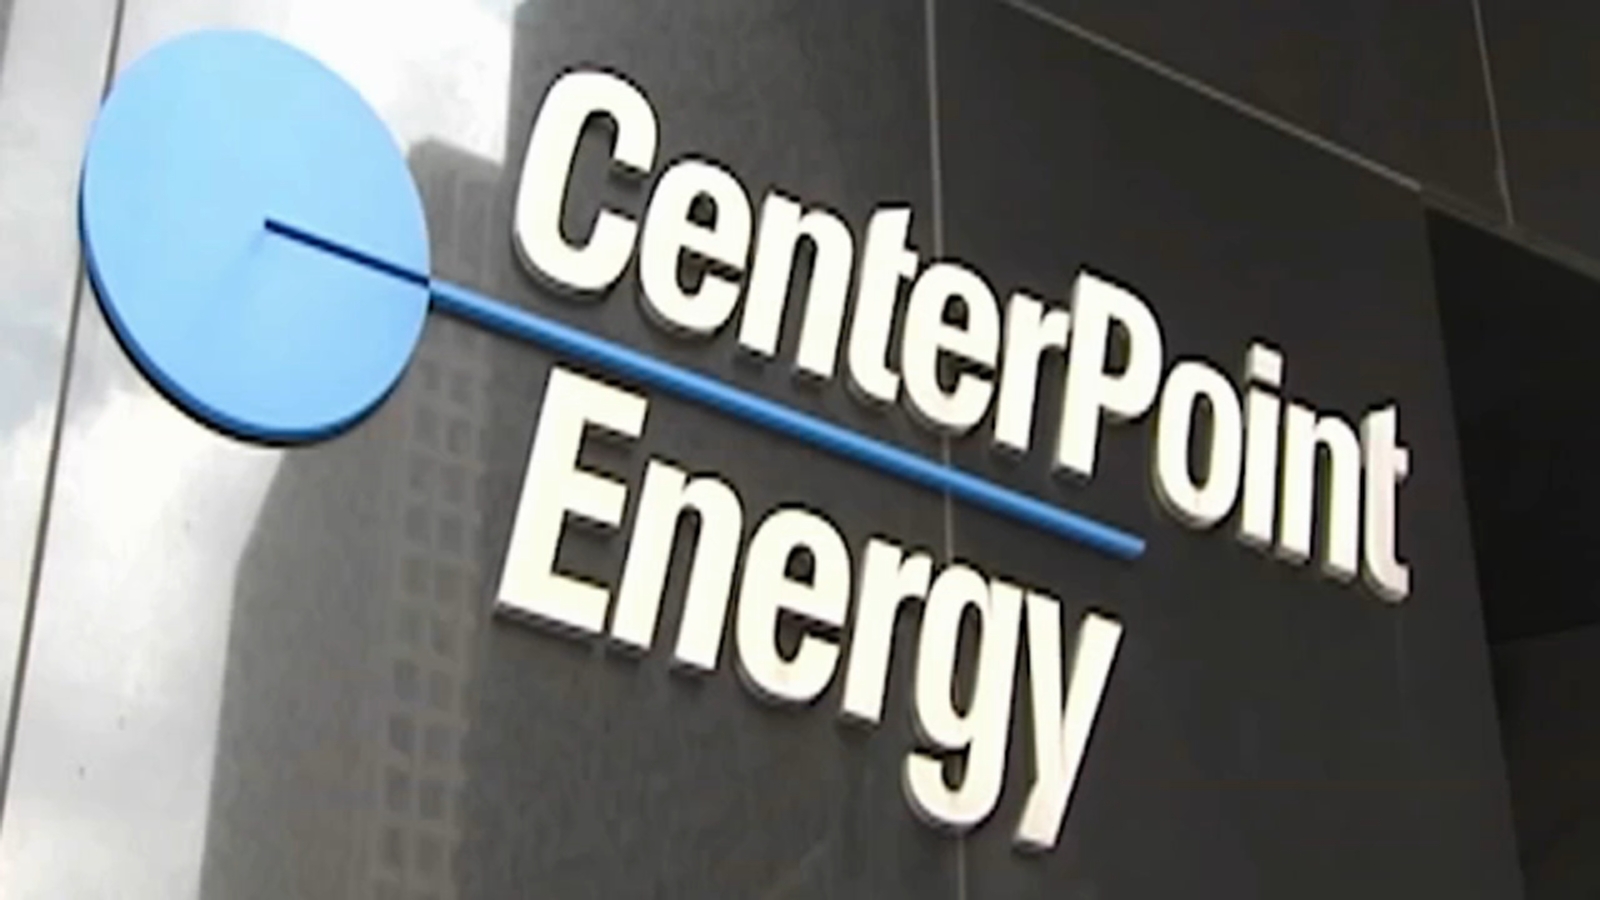 Houston-area power outages: Hundreds of thousands of CenterPoint Energy customers without electricity following damaging storms [Video]